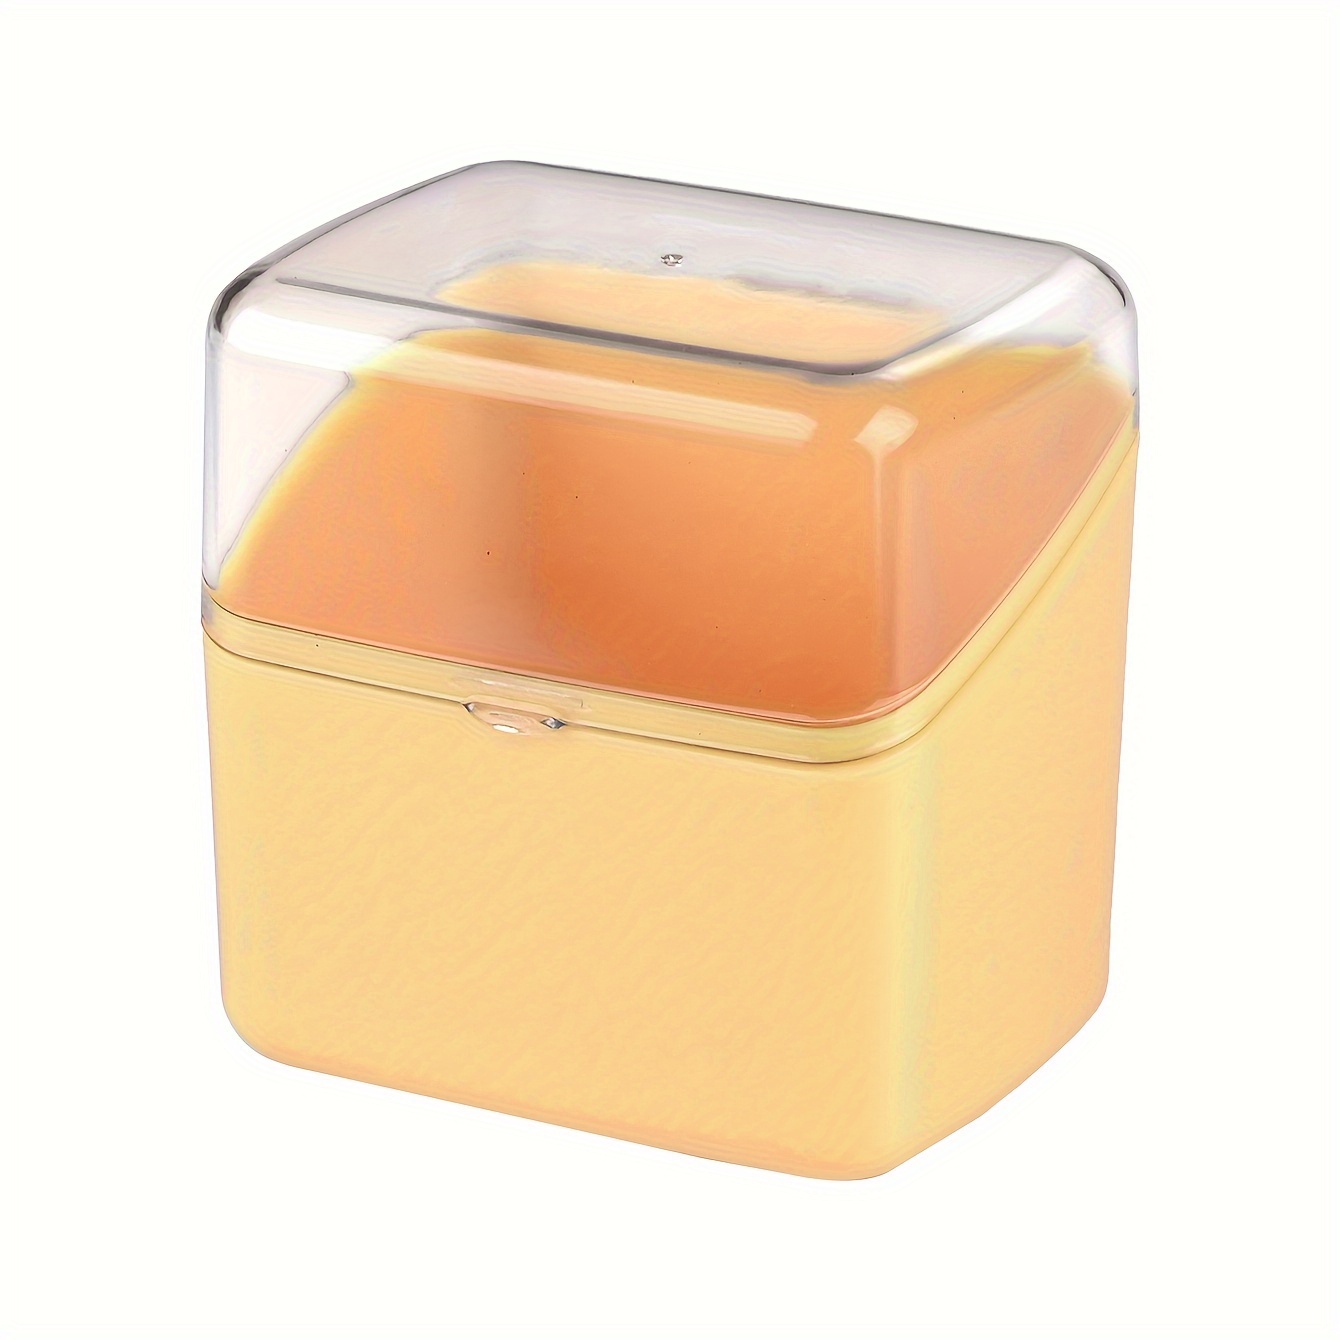 1pc Cheese Storage Box, Fridge Airtight Food Container With Flip Top Lid  For Butter, Vegetables, And Seasoning Storage